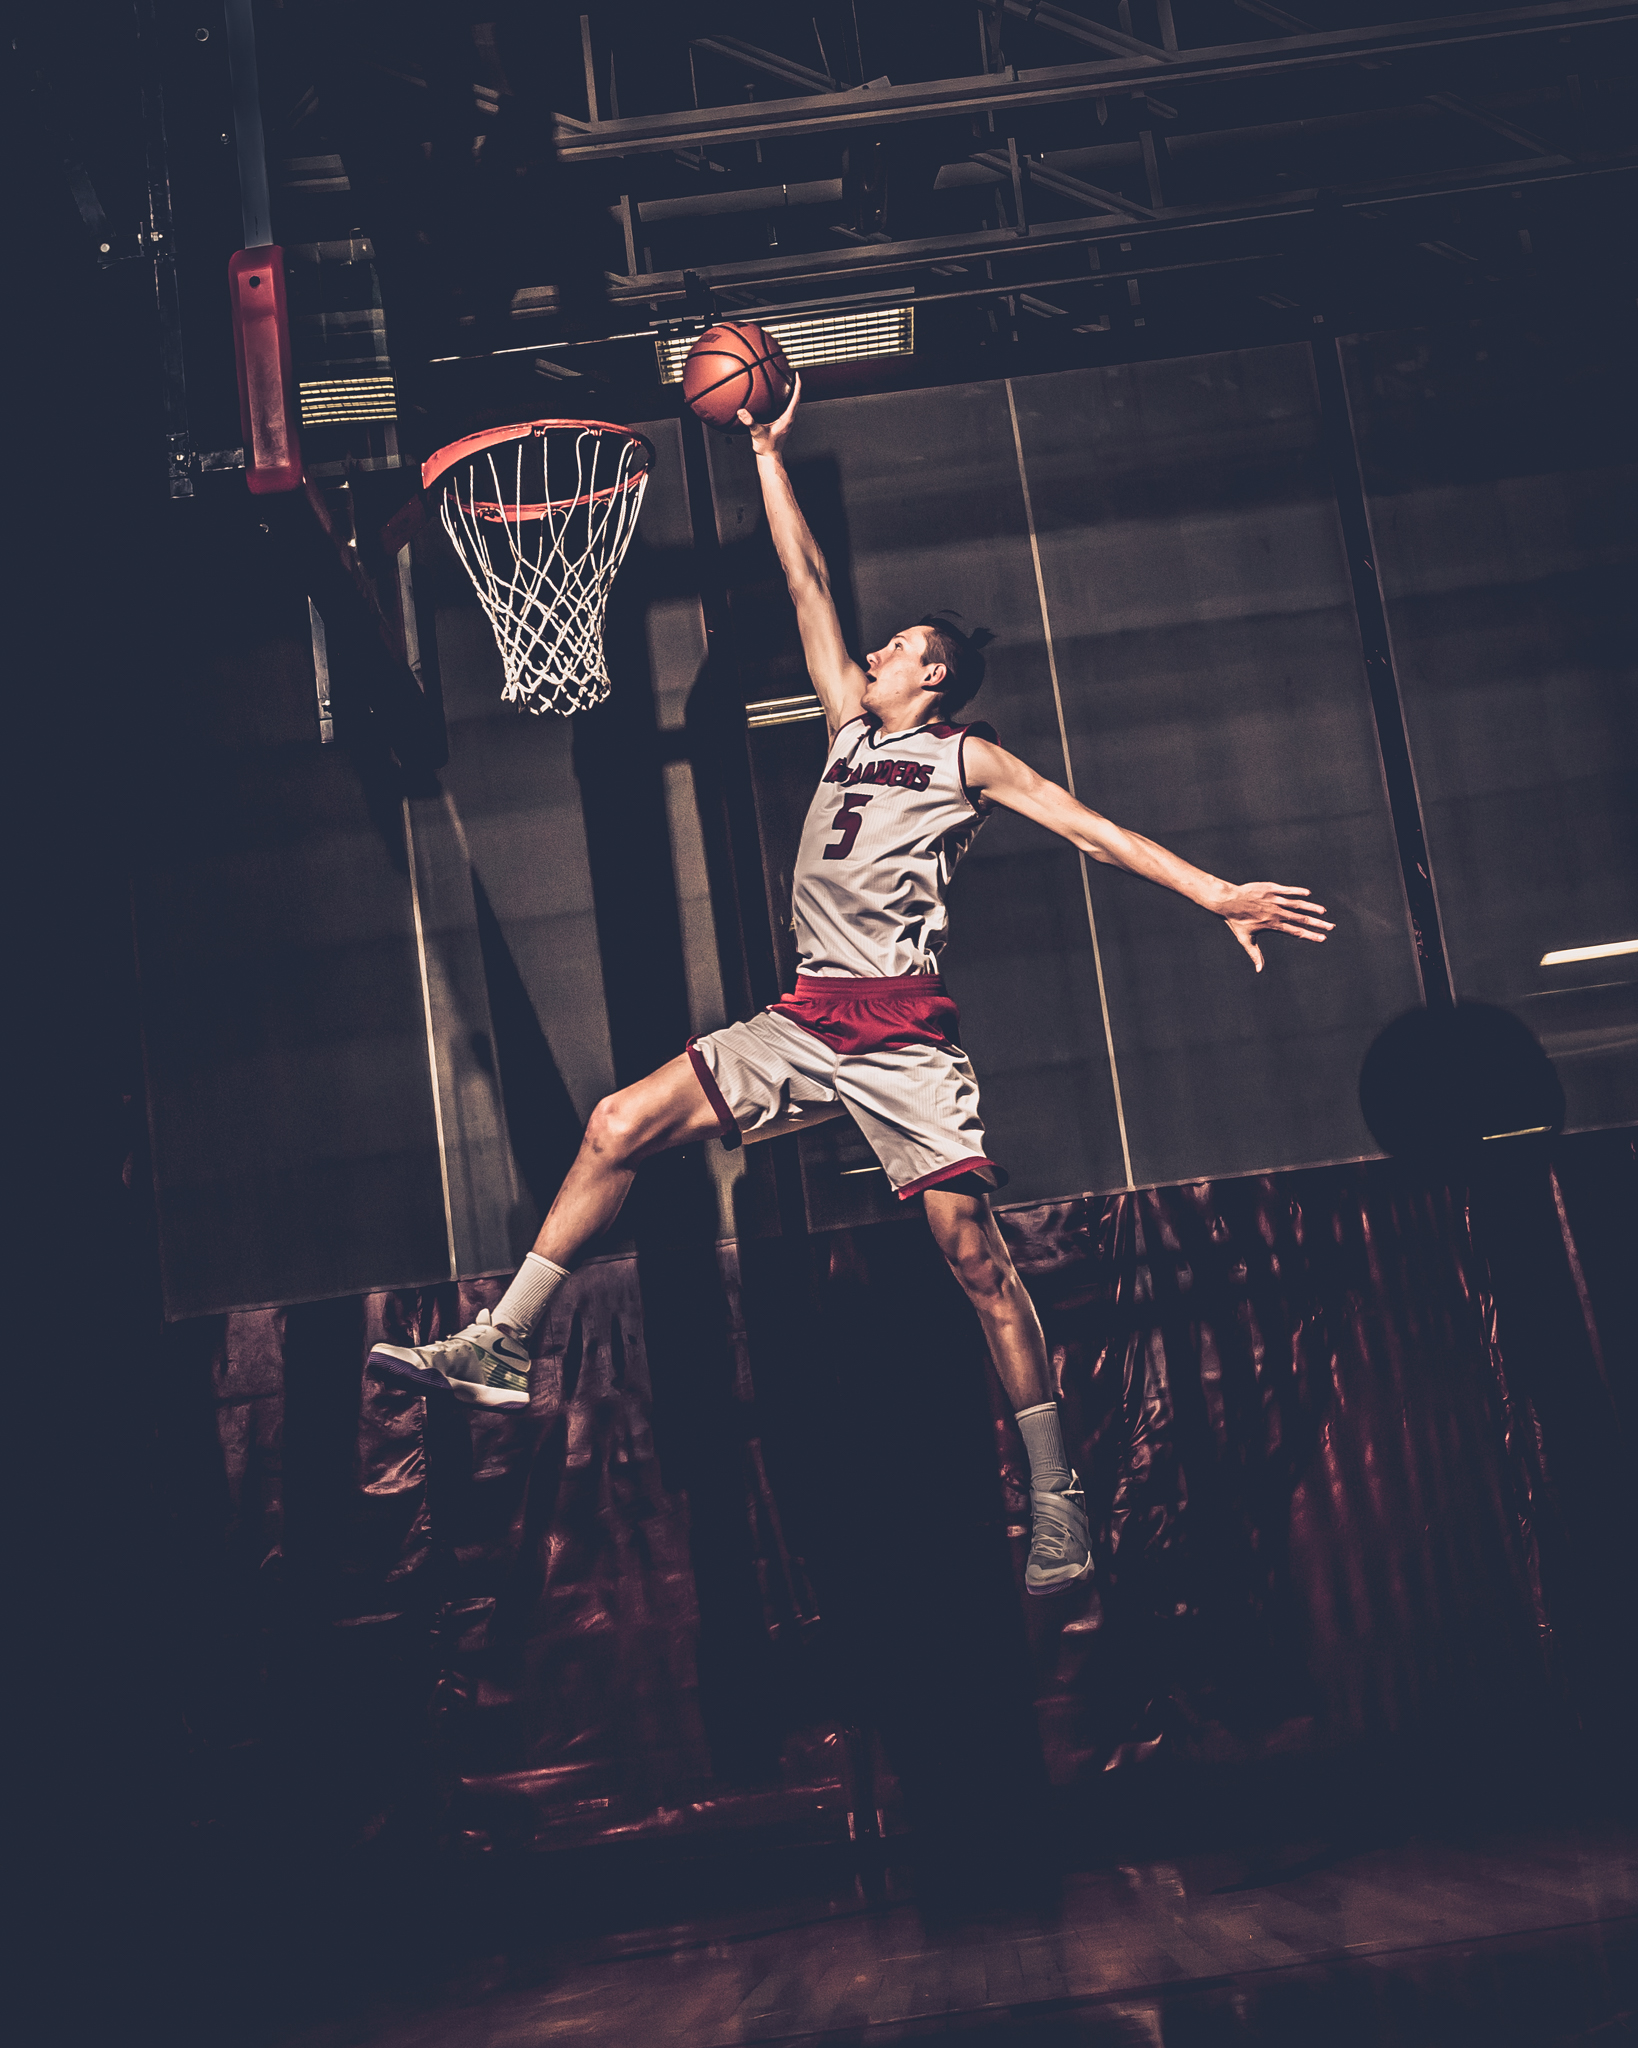 dover-new-hampshire-high-school-senior-pictures-photographer-chris-keeley-photography-sports-basketball.jpg